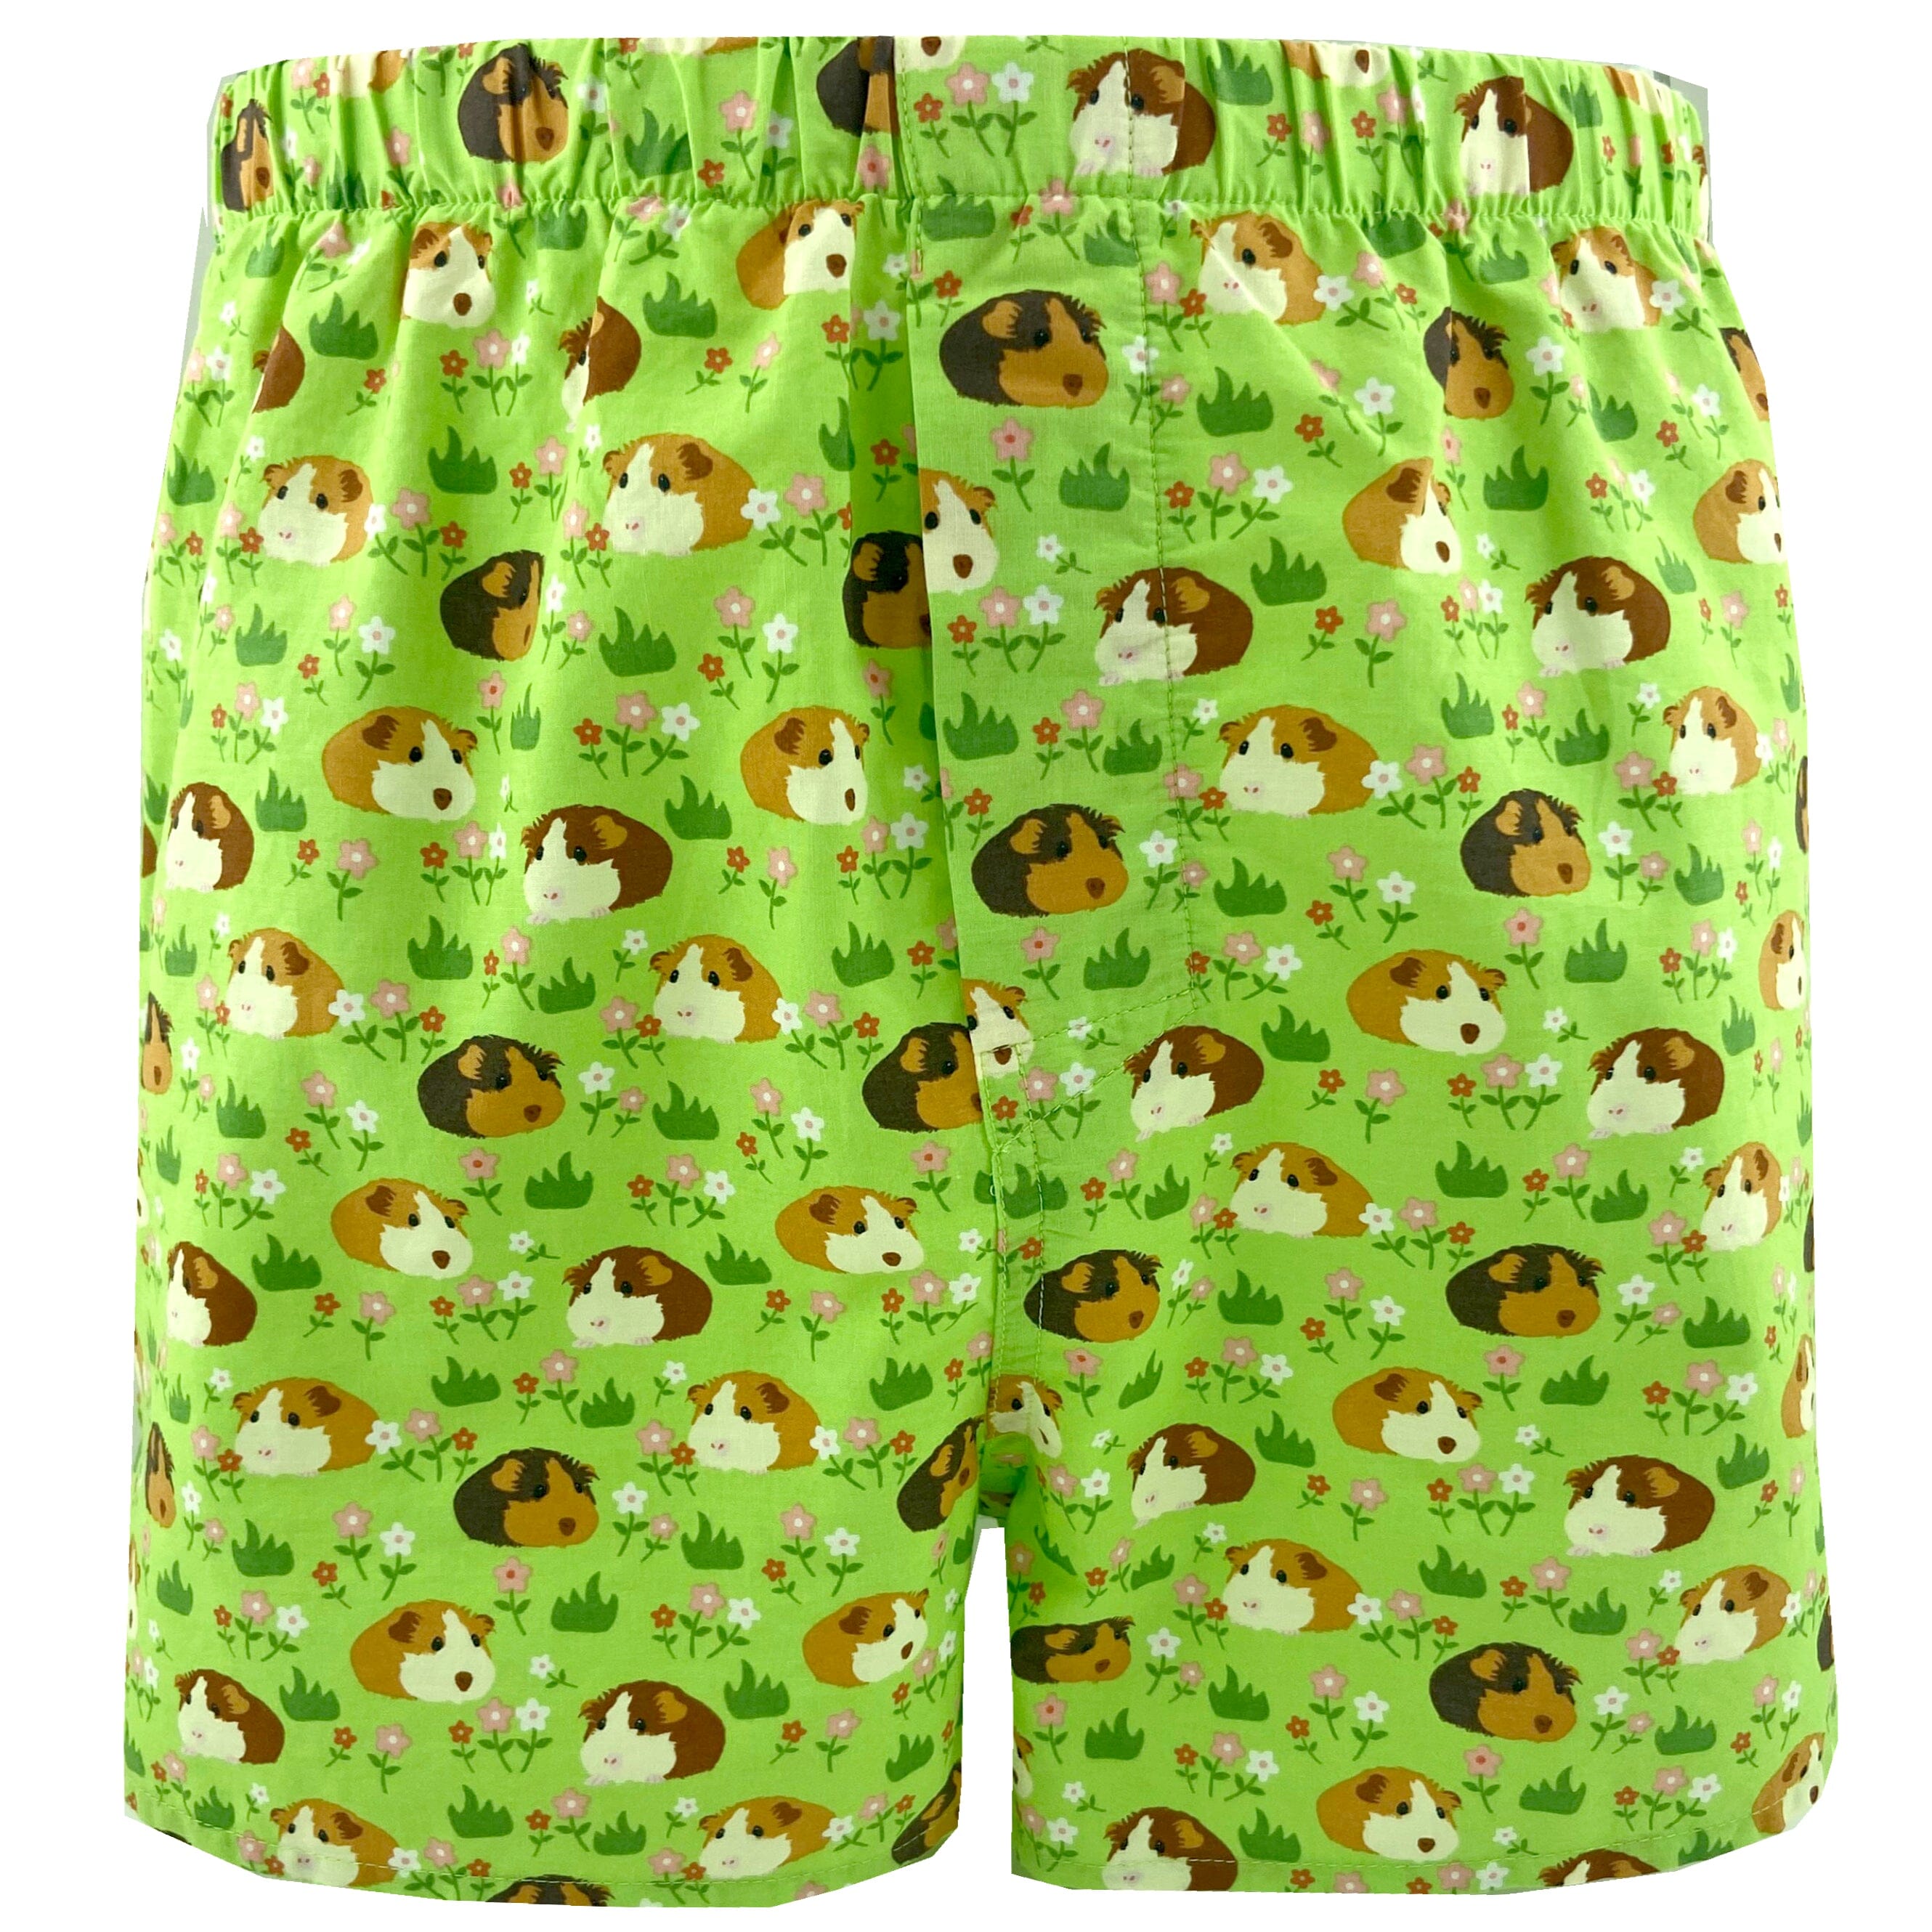 Guinea Pig All Over Print Boxers For Men. Pet Inspired Boxer Shorts